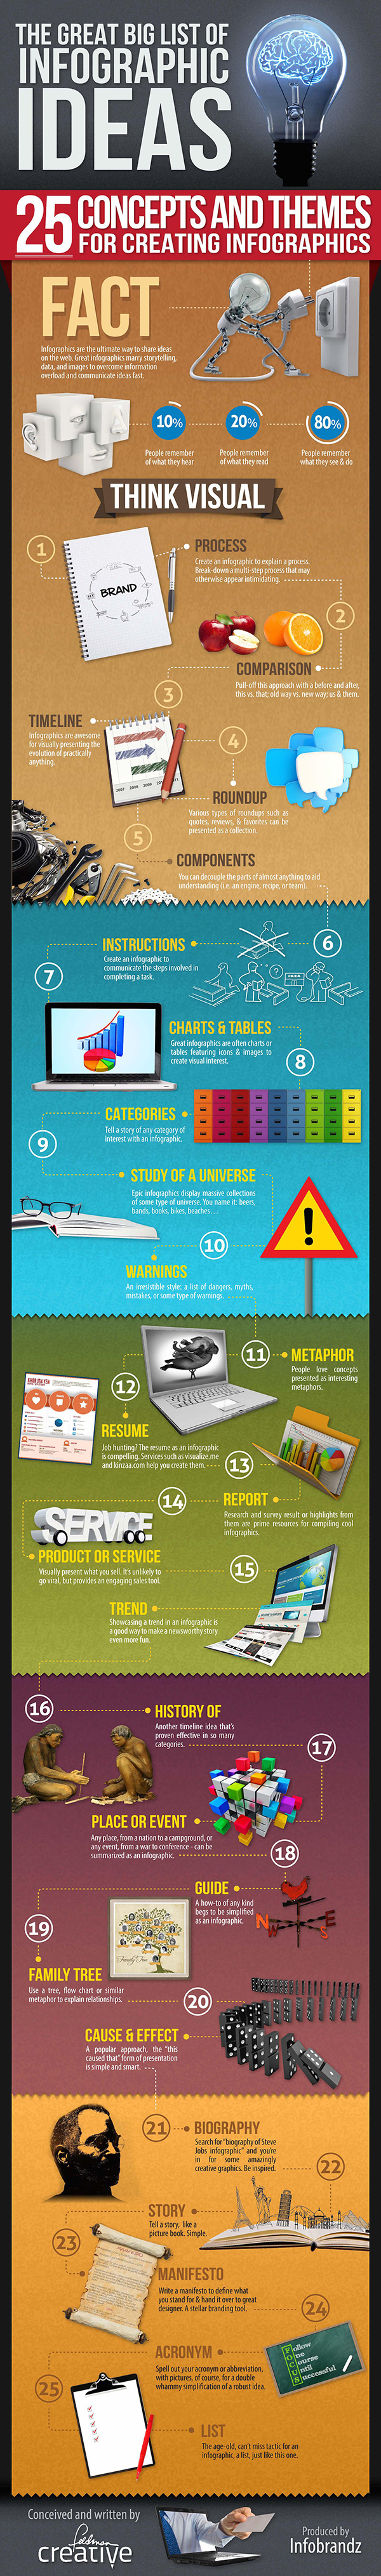 The Great Big List Of Infographic Ideas